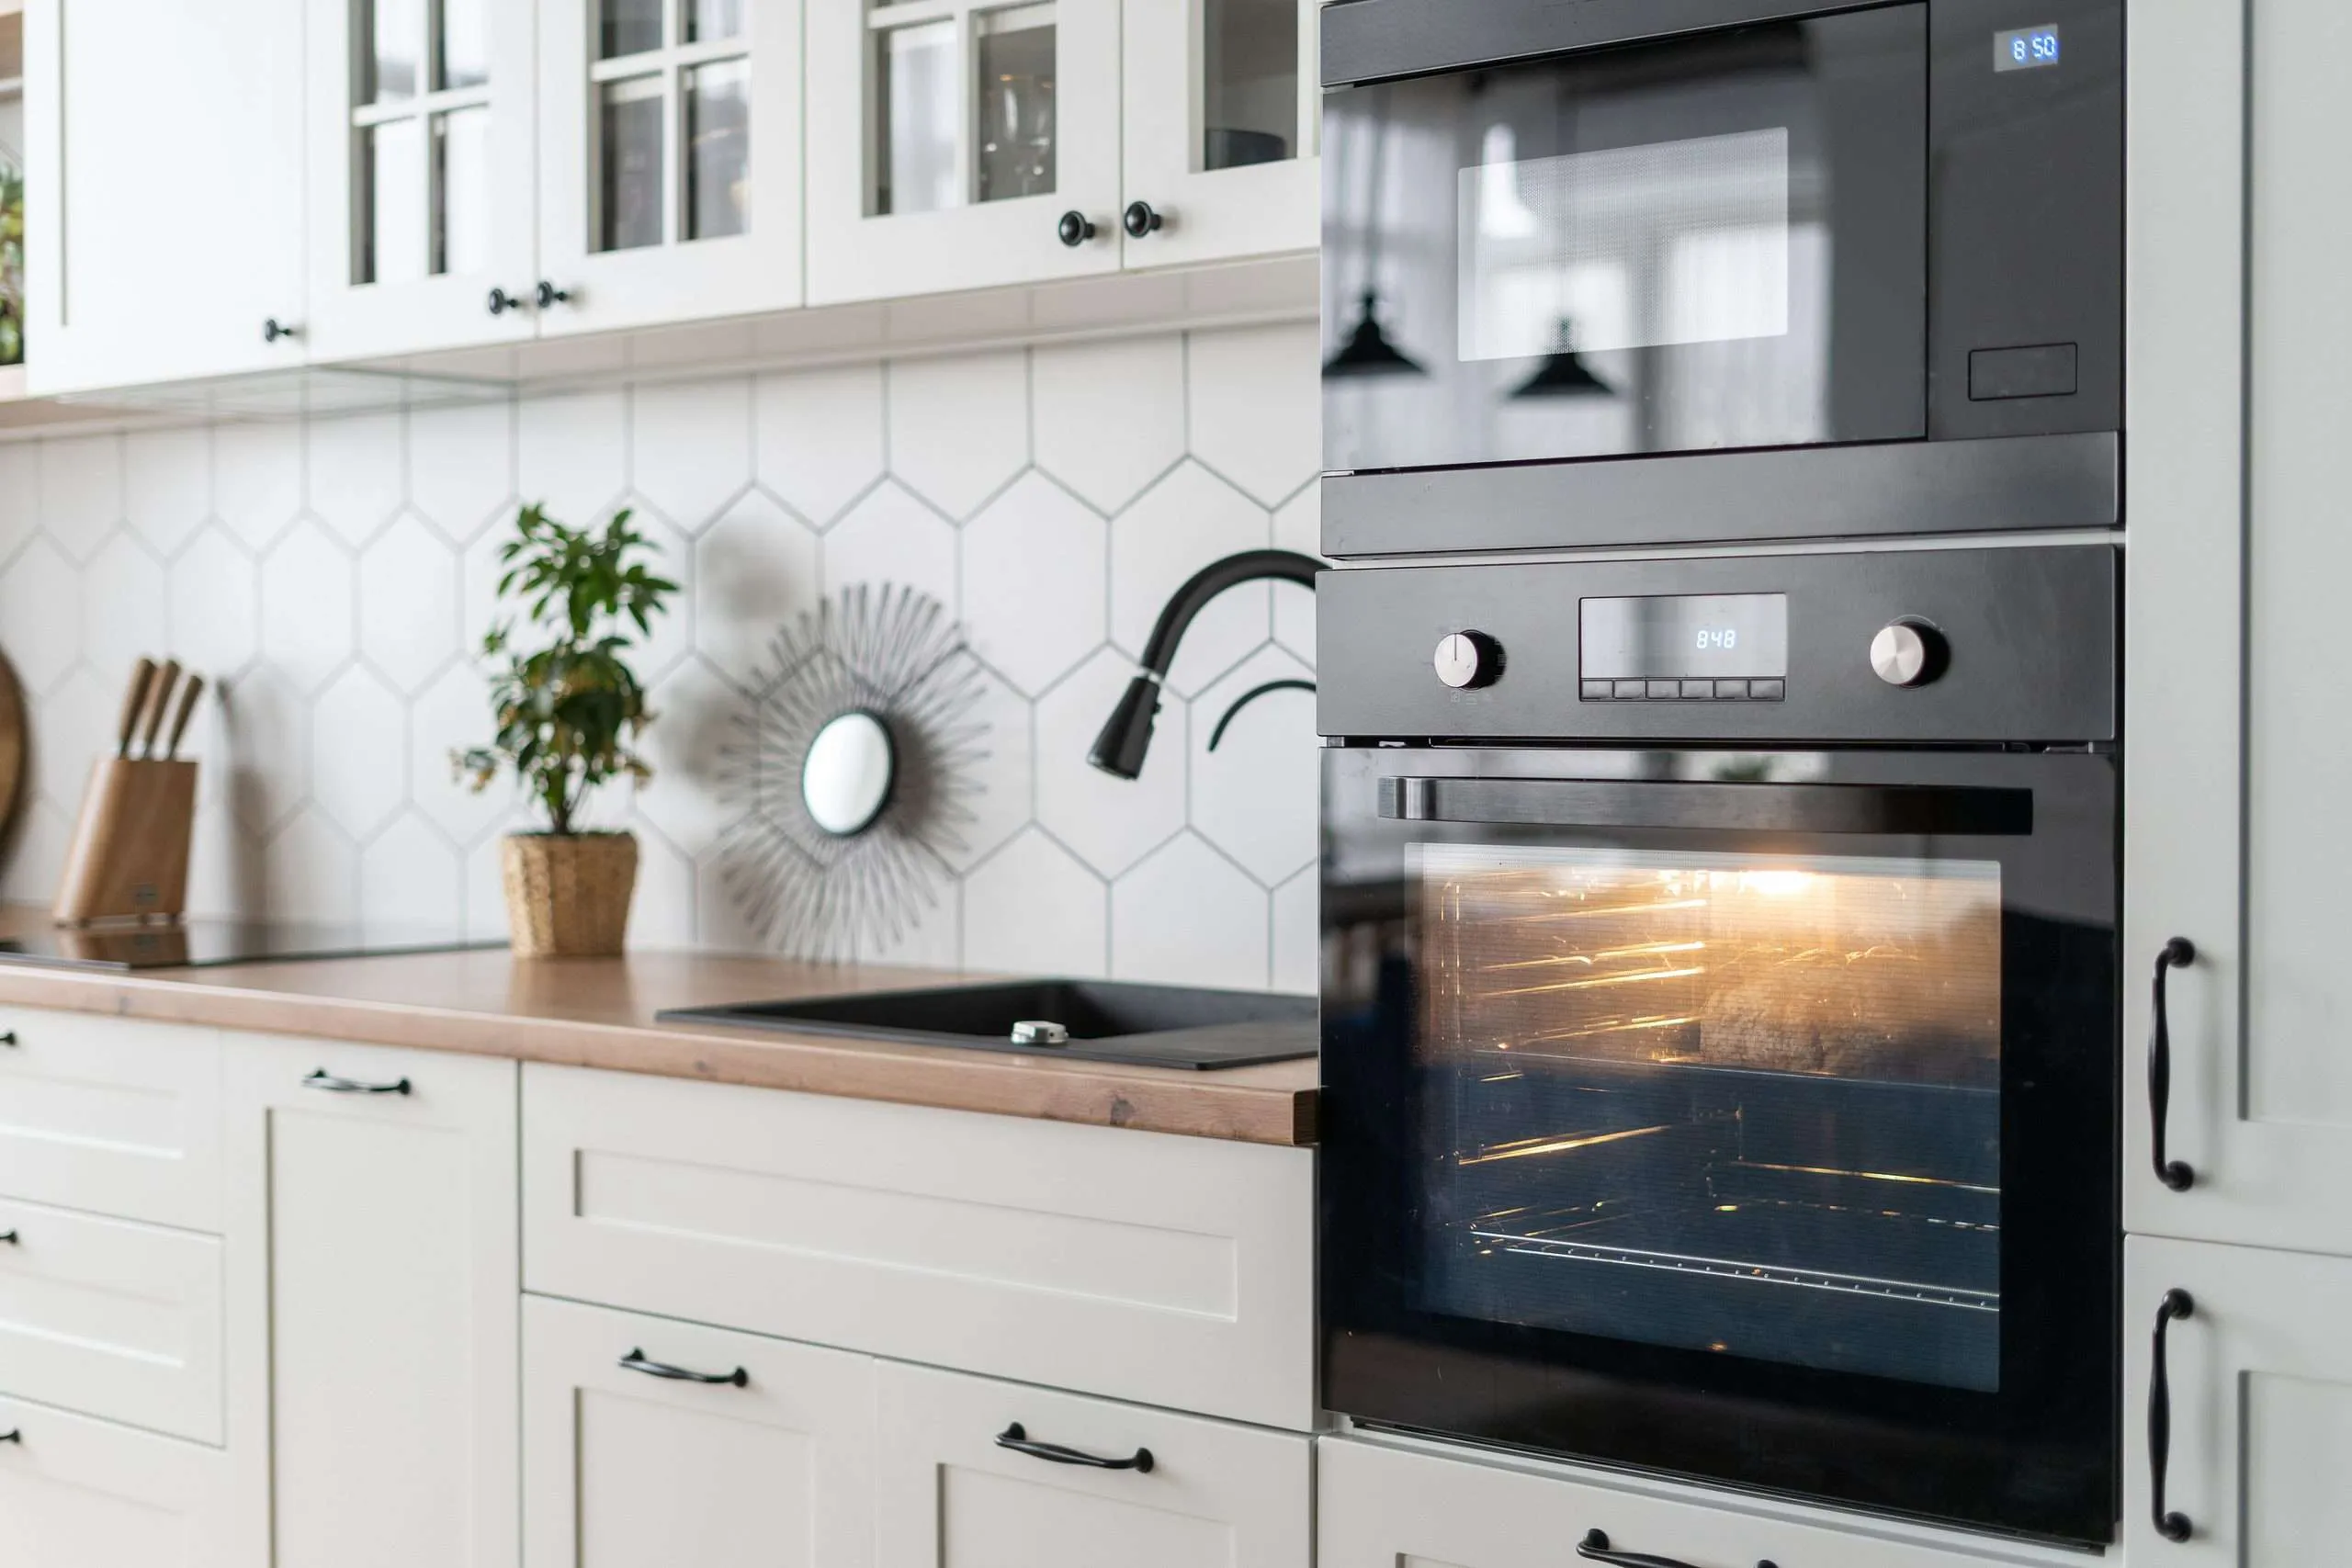 5 Simple Ways New Cabinets Can Brighten Up Your Sarasota Kitchen